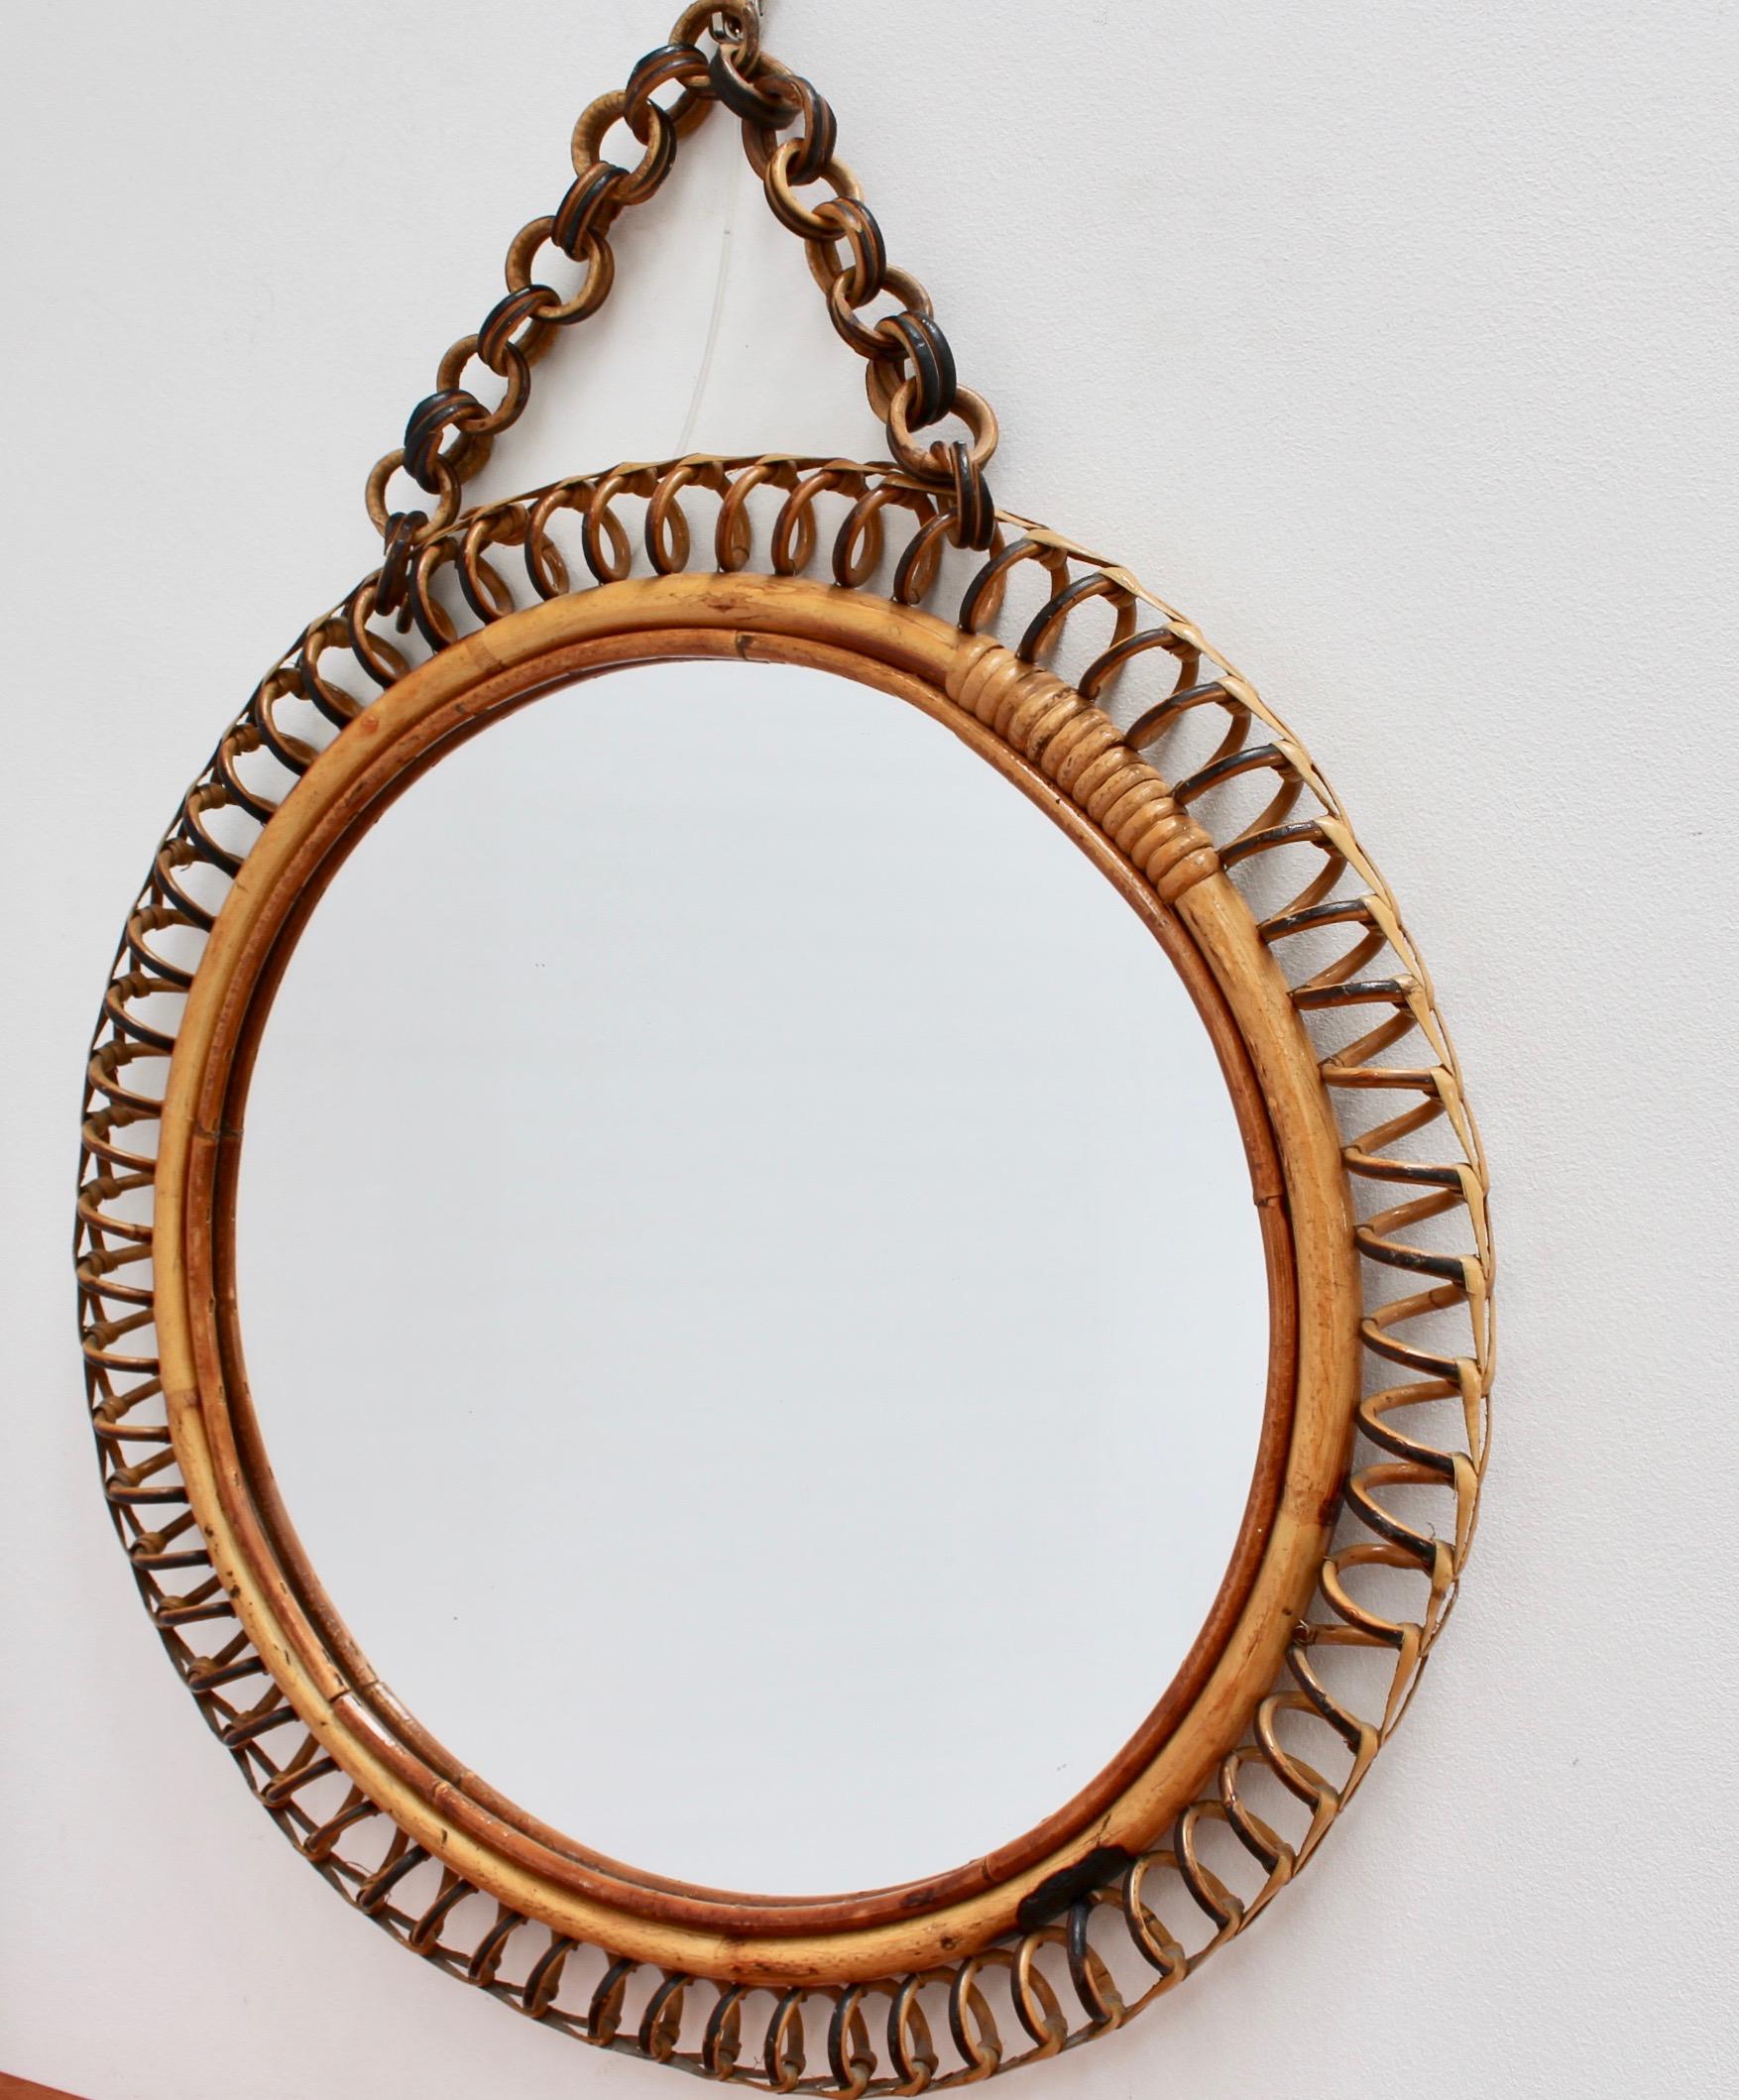 Italian circular-shaped rattan wall mirror (circa 1960s). This mirror has a very charming round shape with rattan spirals framing the mirror. The rattan hanging chain adds further allure. There is a characterful, aged patina on the mirror frame. In